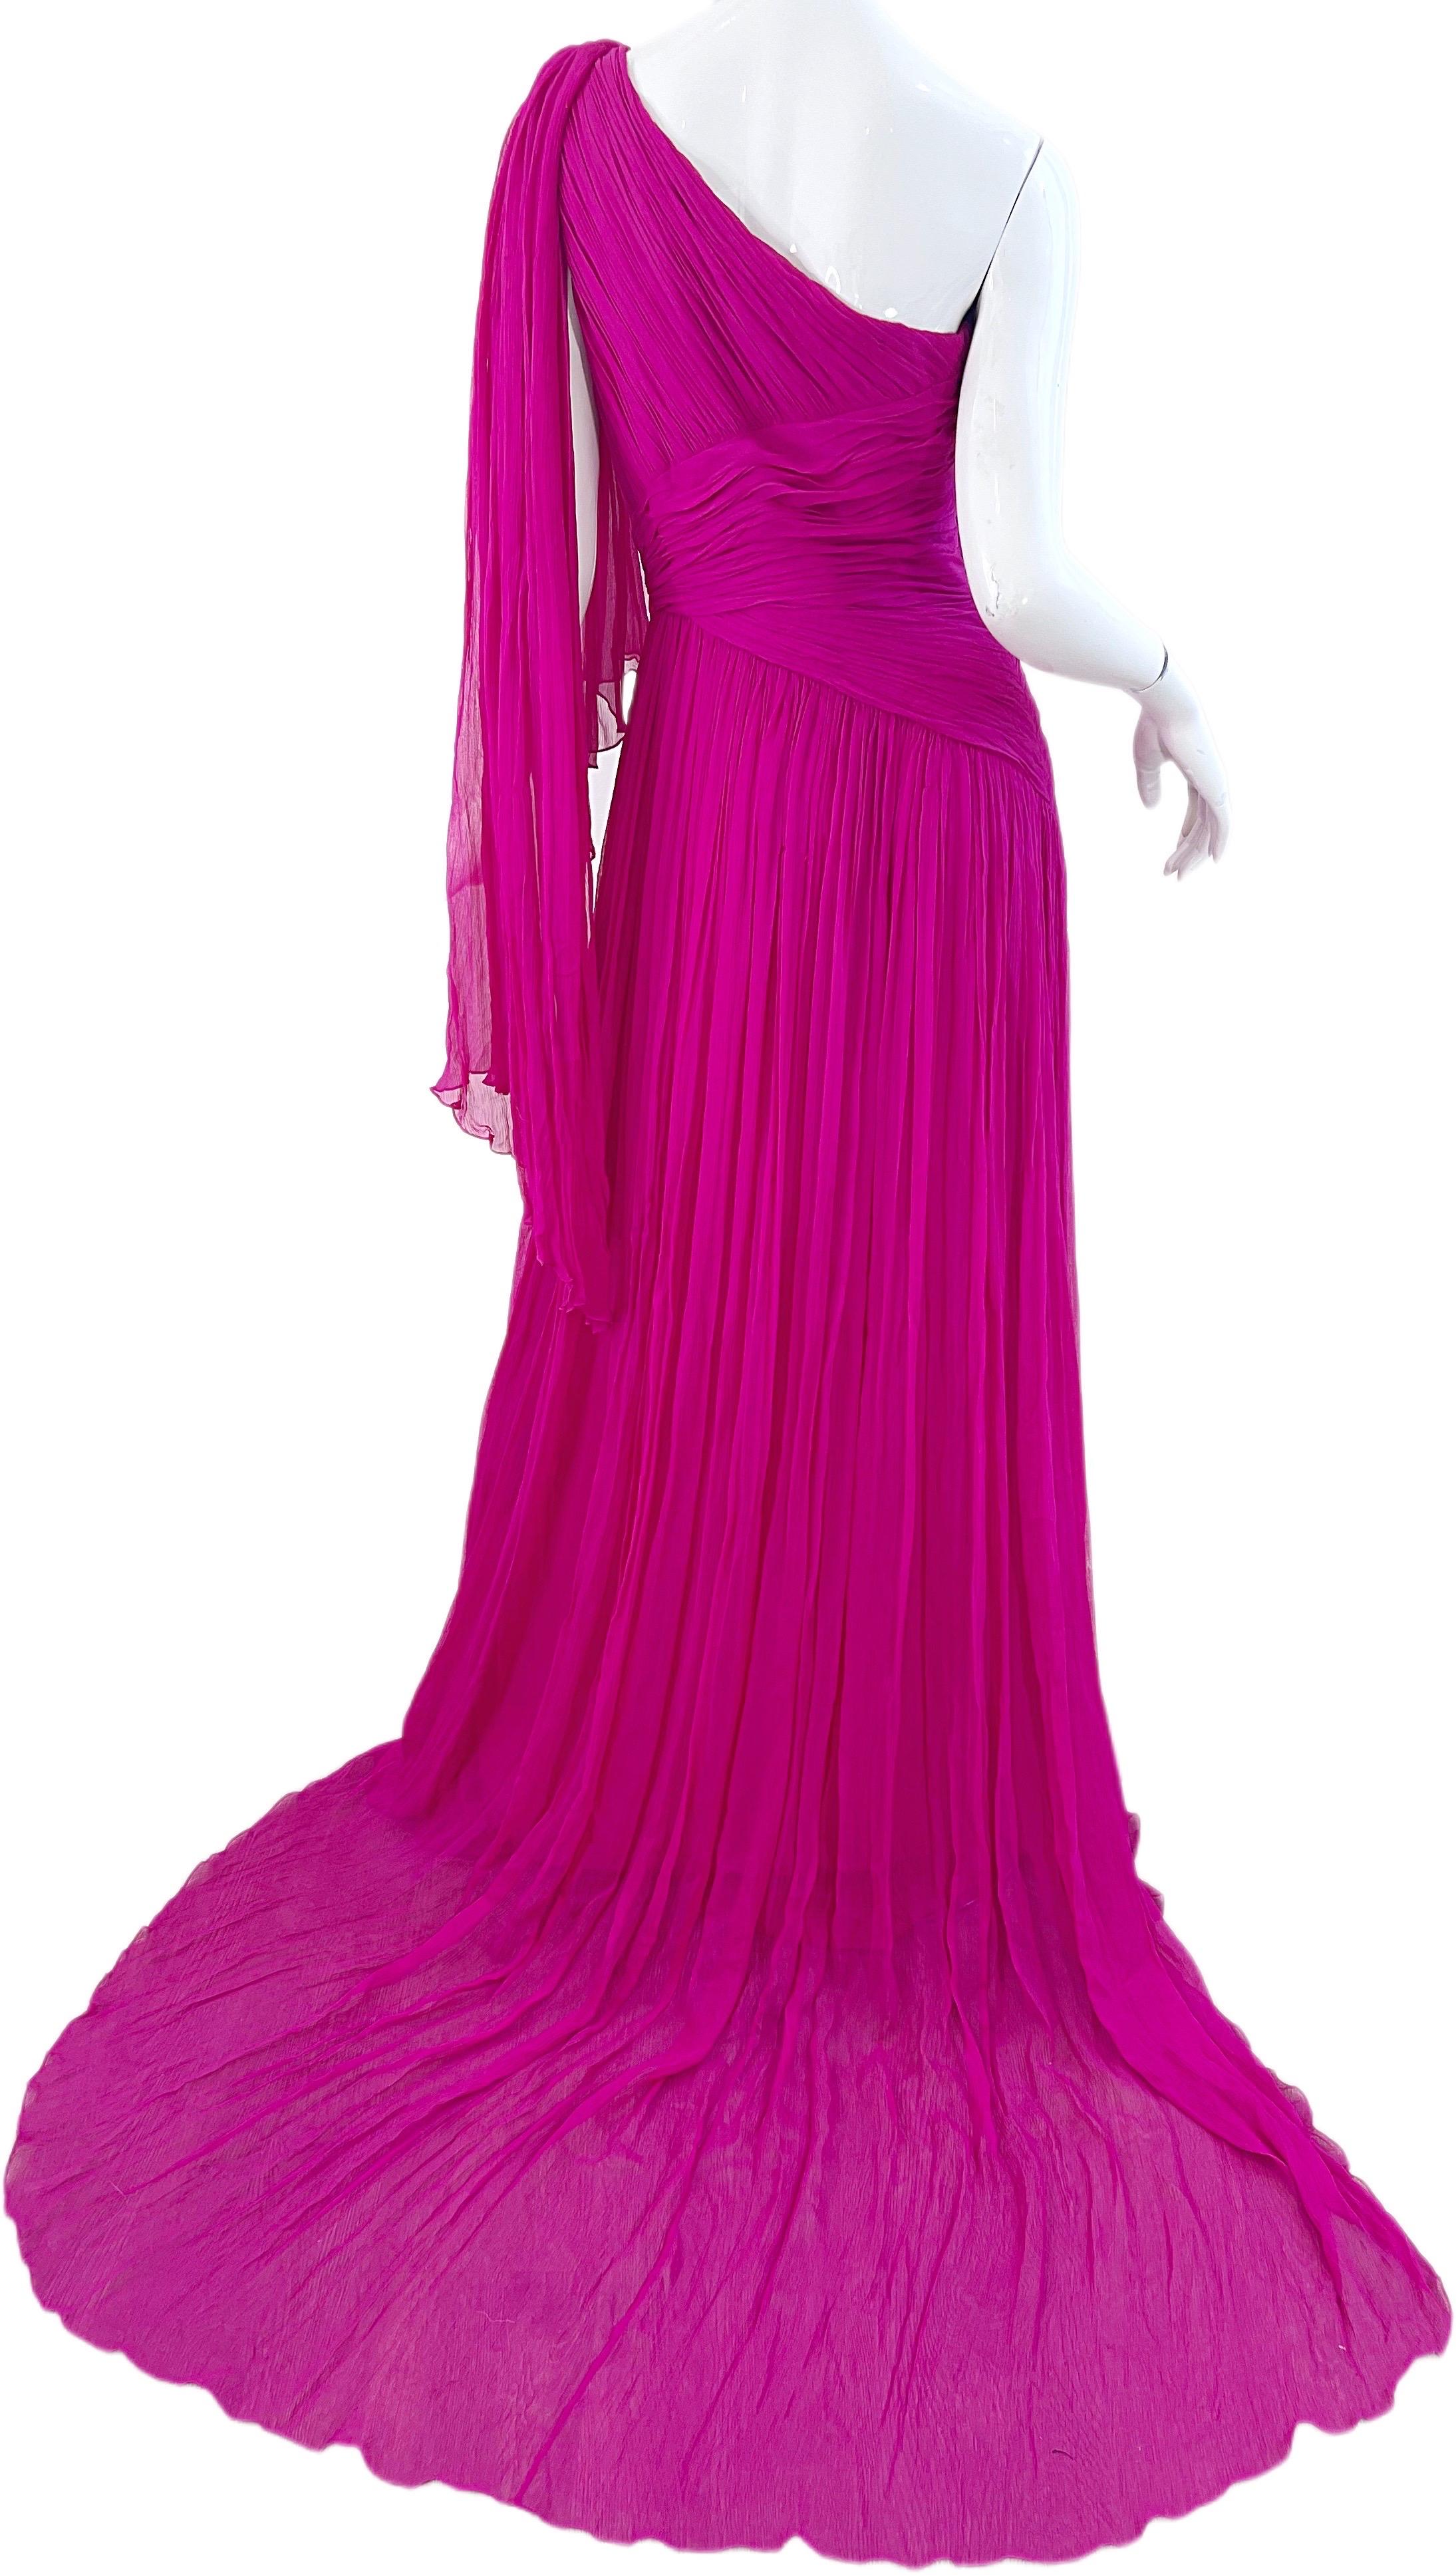 NWT Pamella Roland Spring 2018 Sz 6 / 8 Hot Pink Silk Chiffon One Shoulder Gown For Sale 8